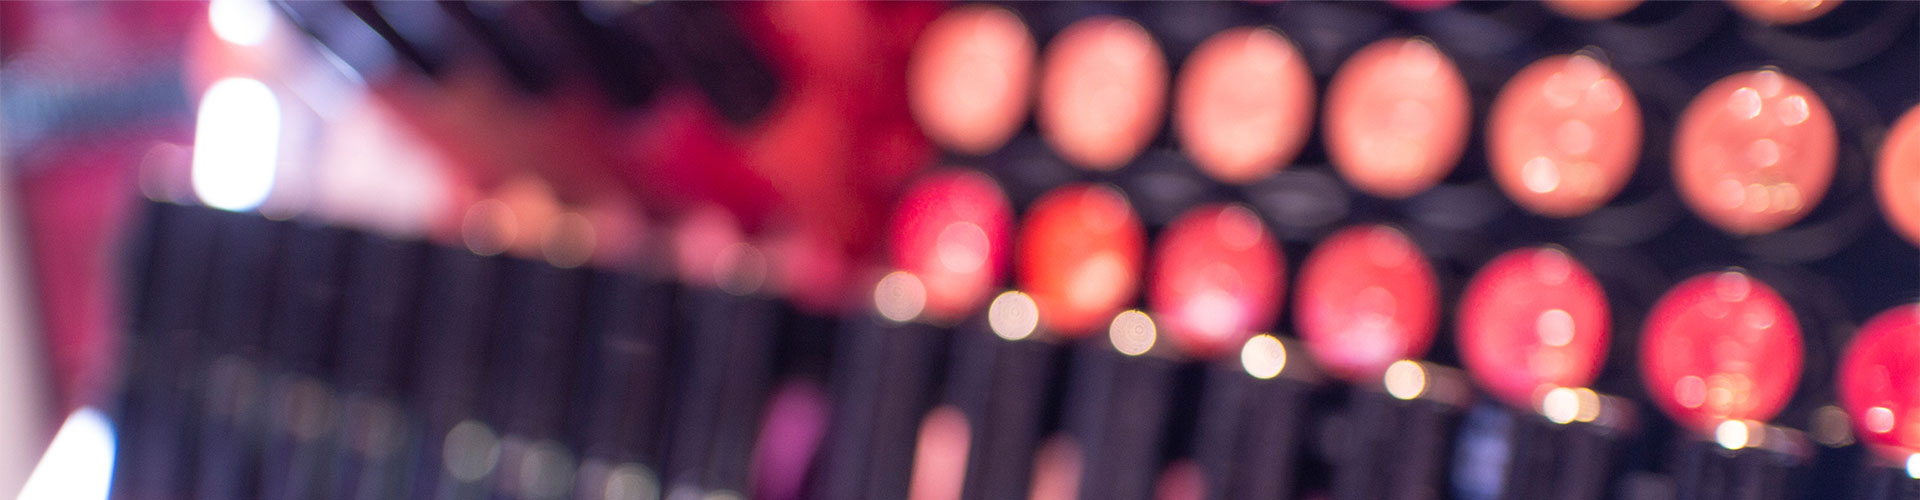 WSL Reports on The Great Makeup Crash of 2019 blog banner featuring closeup of lipstick display in store